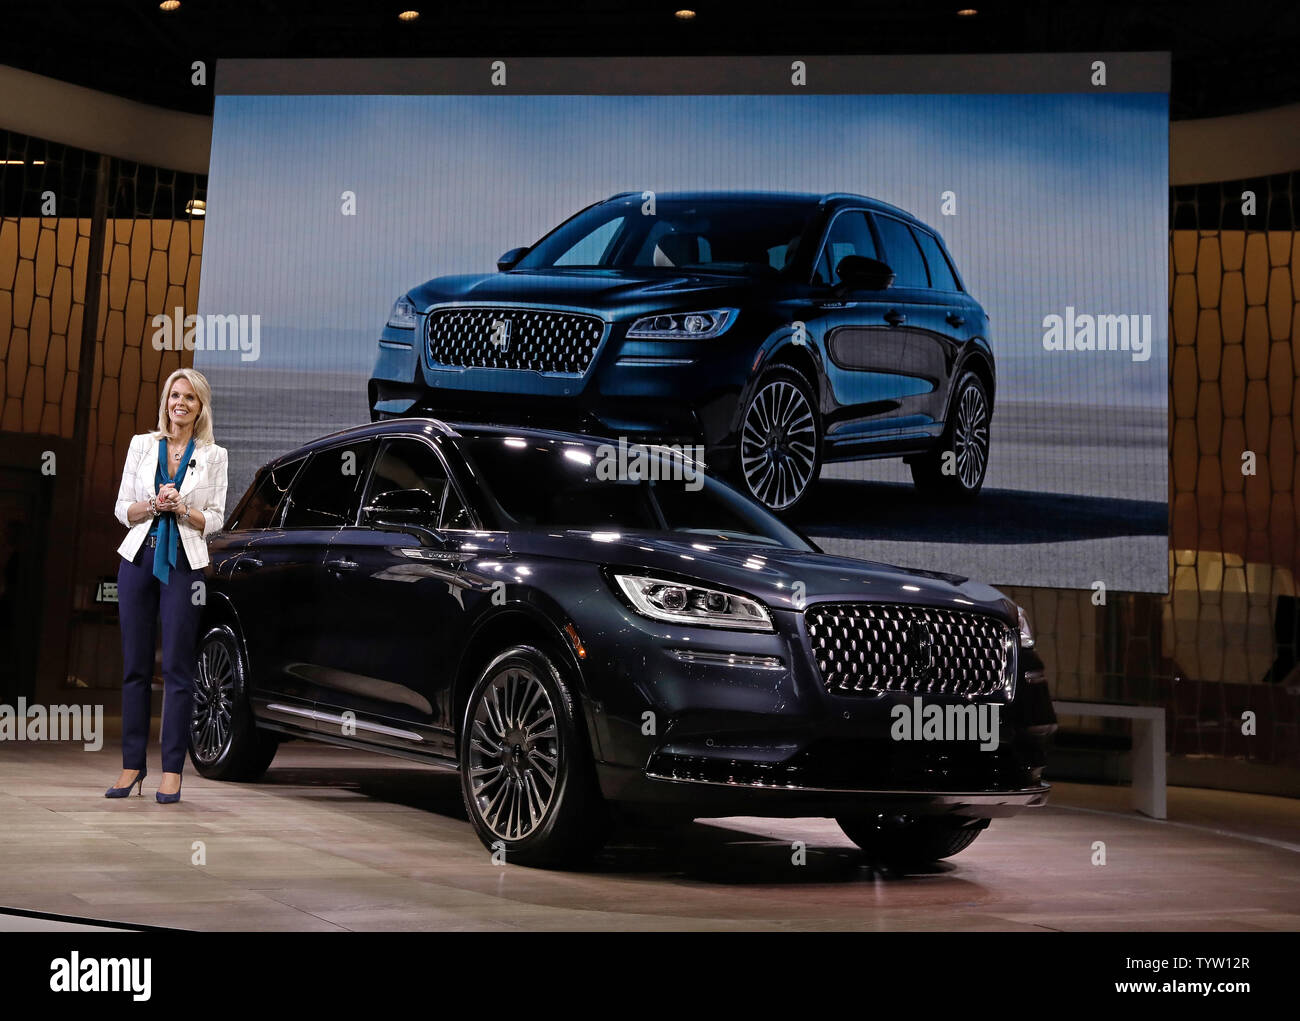 Joy Falotico, president of Lincoln Motor Company introduces the 2019 Lincoln Corsair SUV on display at the Lincoln presentation at the 2019 New York International Auto Show at the Jacob K. Javits Convention Center in New York City on April 17, 2019. The first New York Auto Show was held in 1900 and it was the first auto show ever held in North America. About 1 million visitors are expected to attend the show.      Photo by Peter Foley/UPI Stock Photo